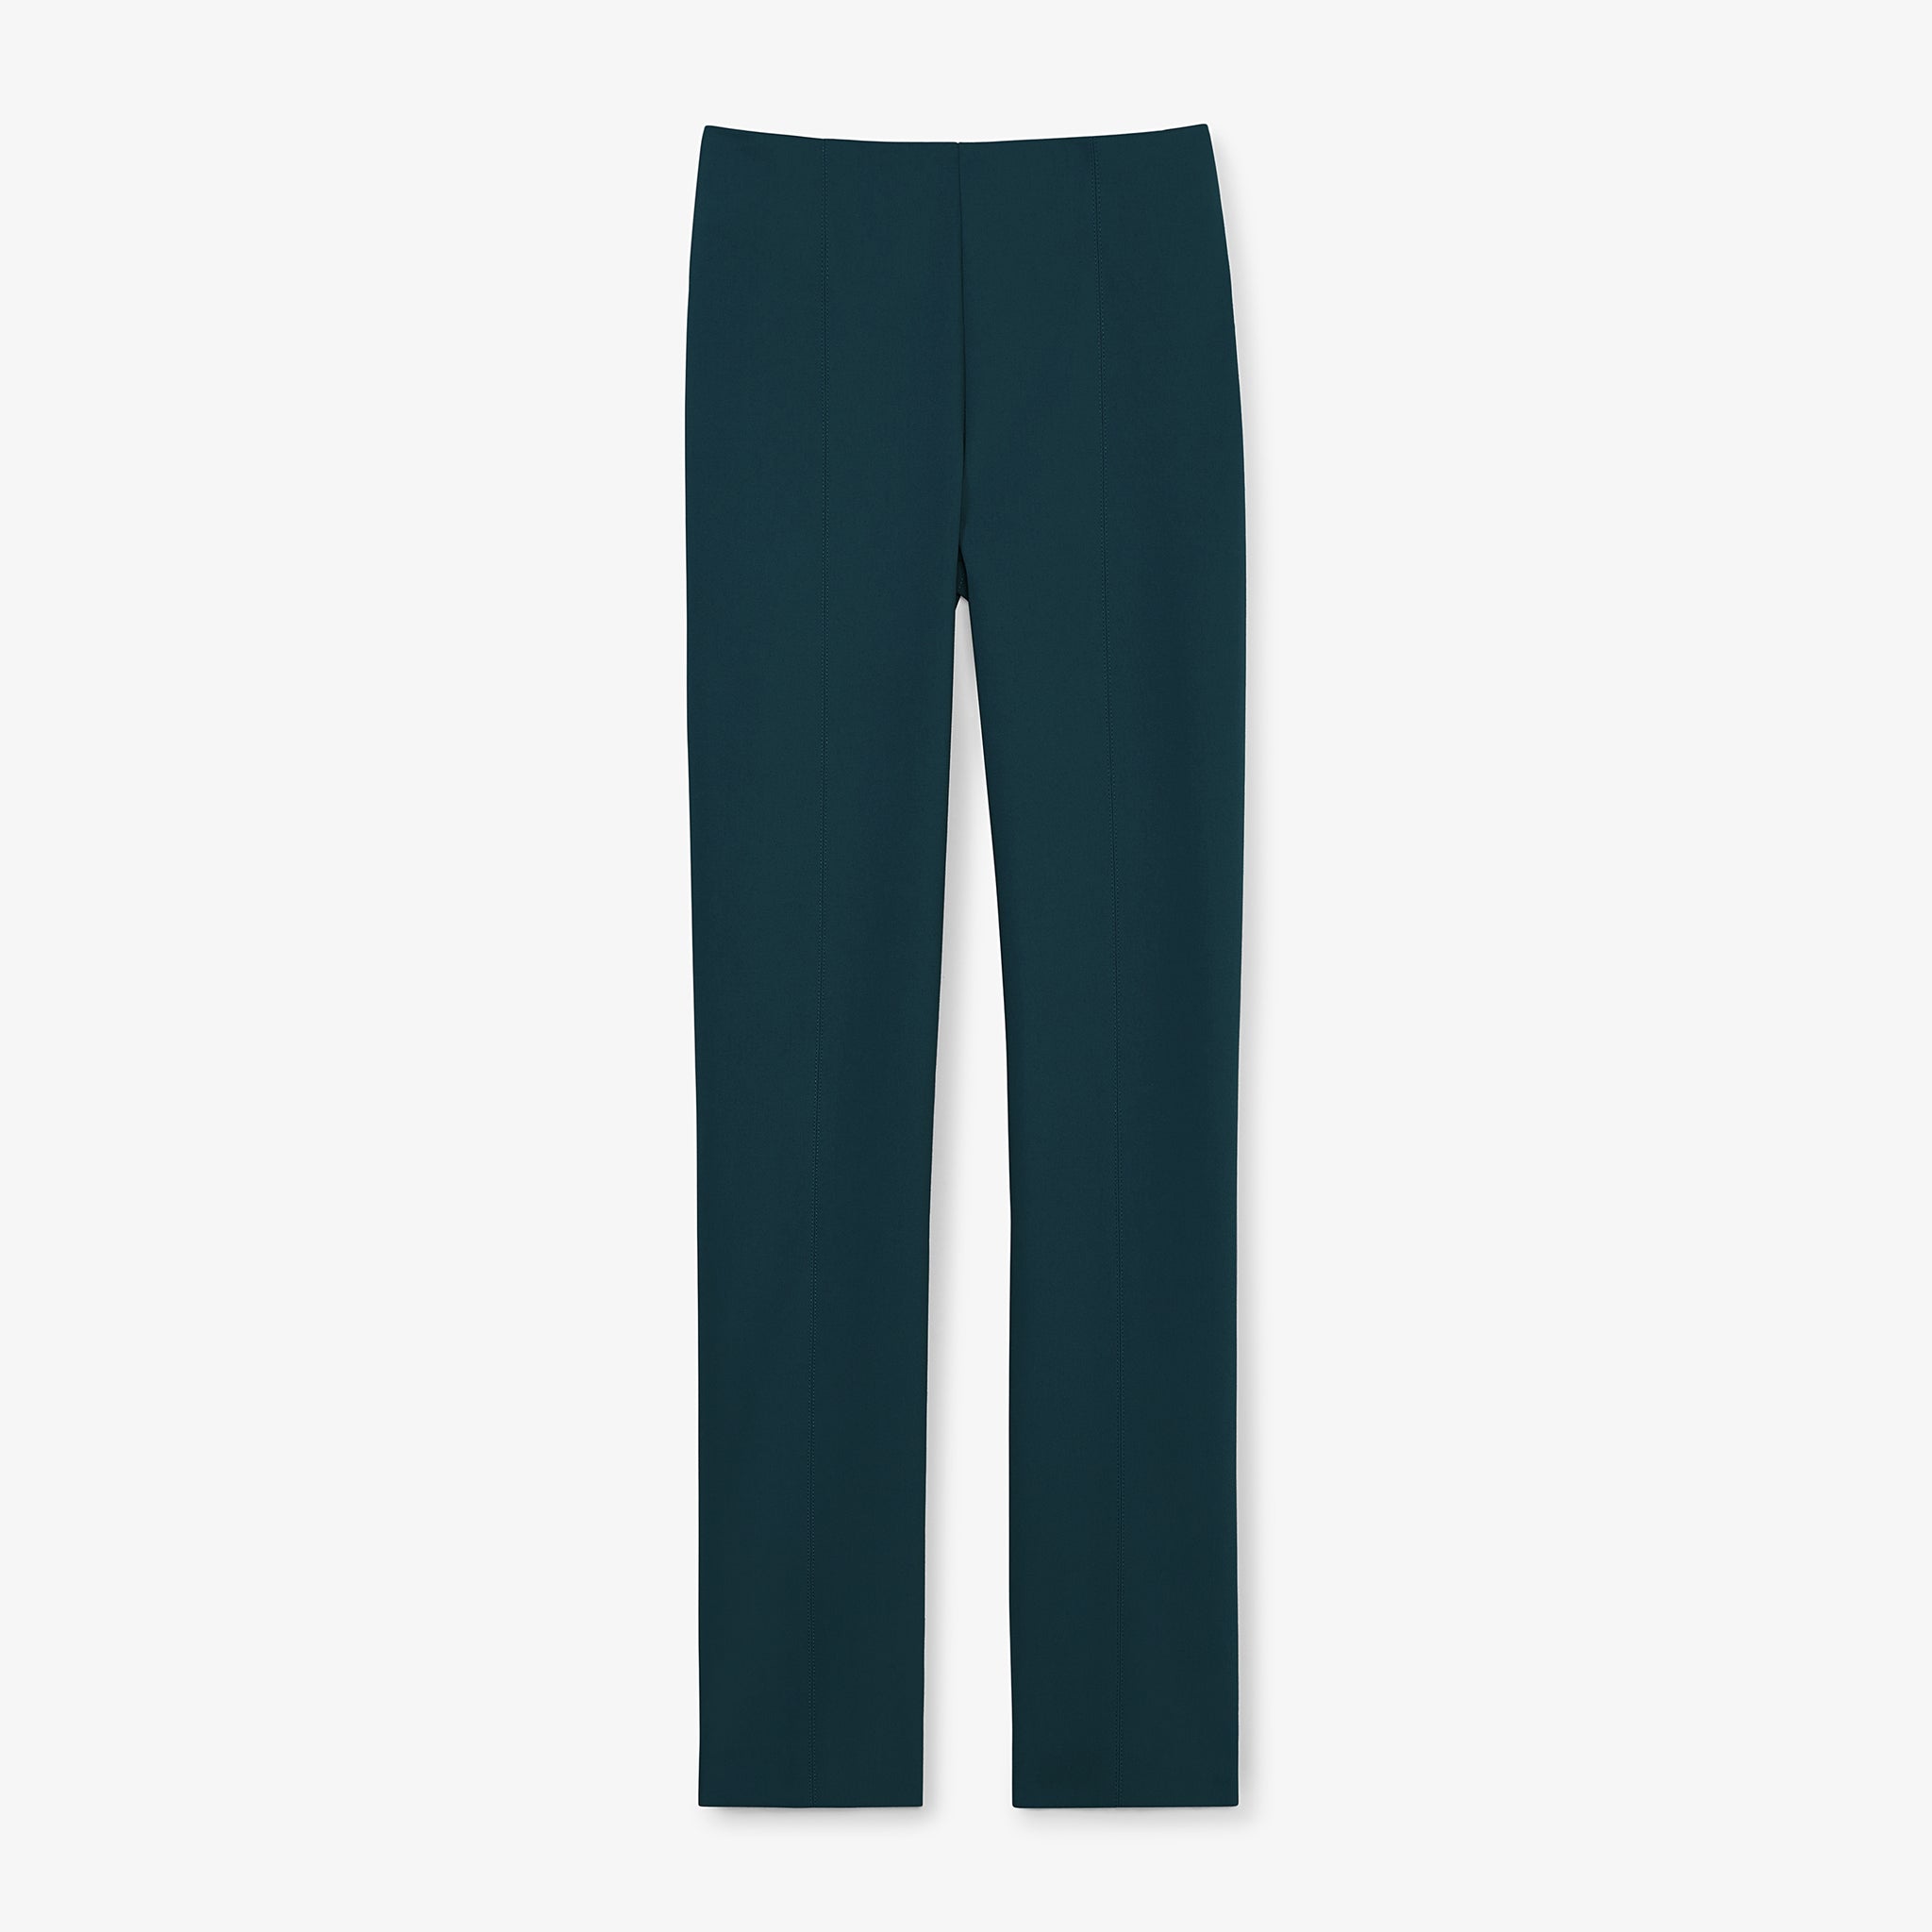 still image of the foster pant in deep sea